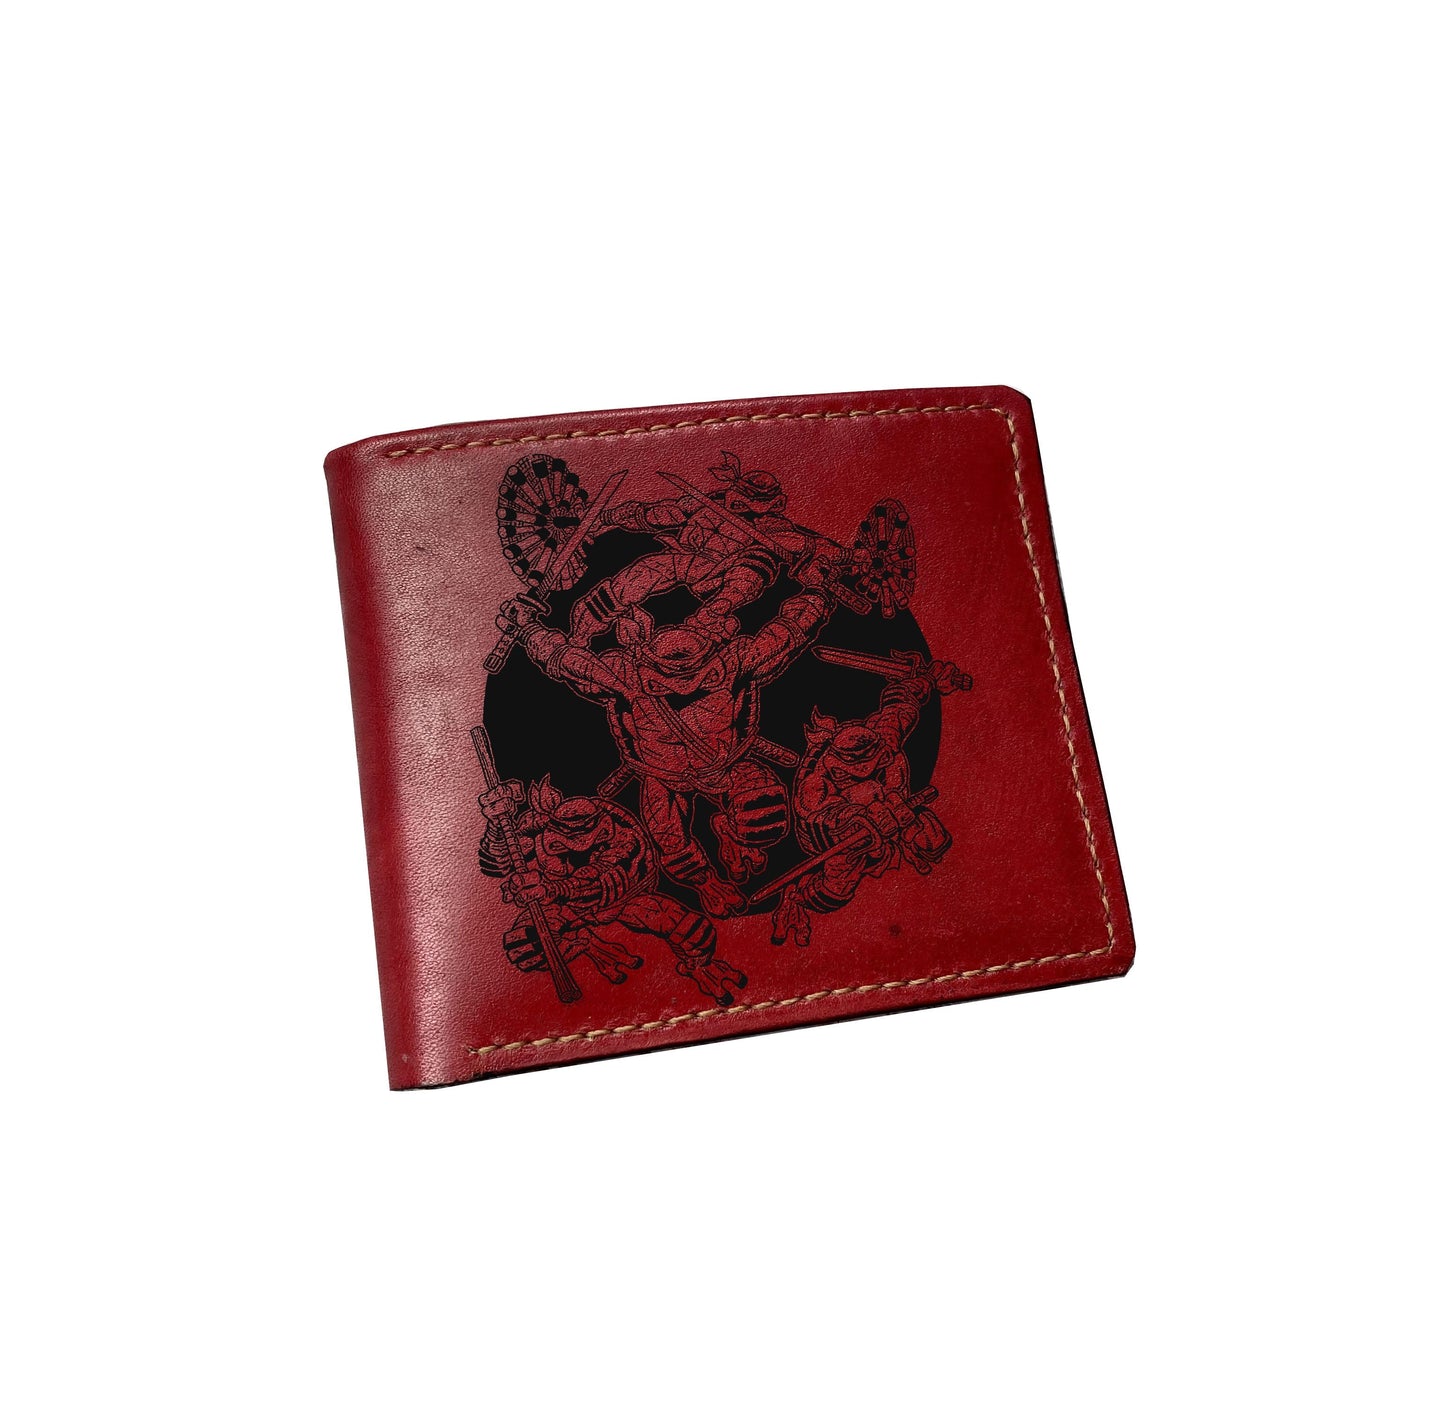 Mayan Corner - Personalized genuine leather handmade wallet, leather gift ideas for him, ninja turtle leather art wallet - 01112215